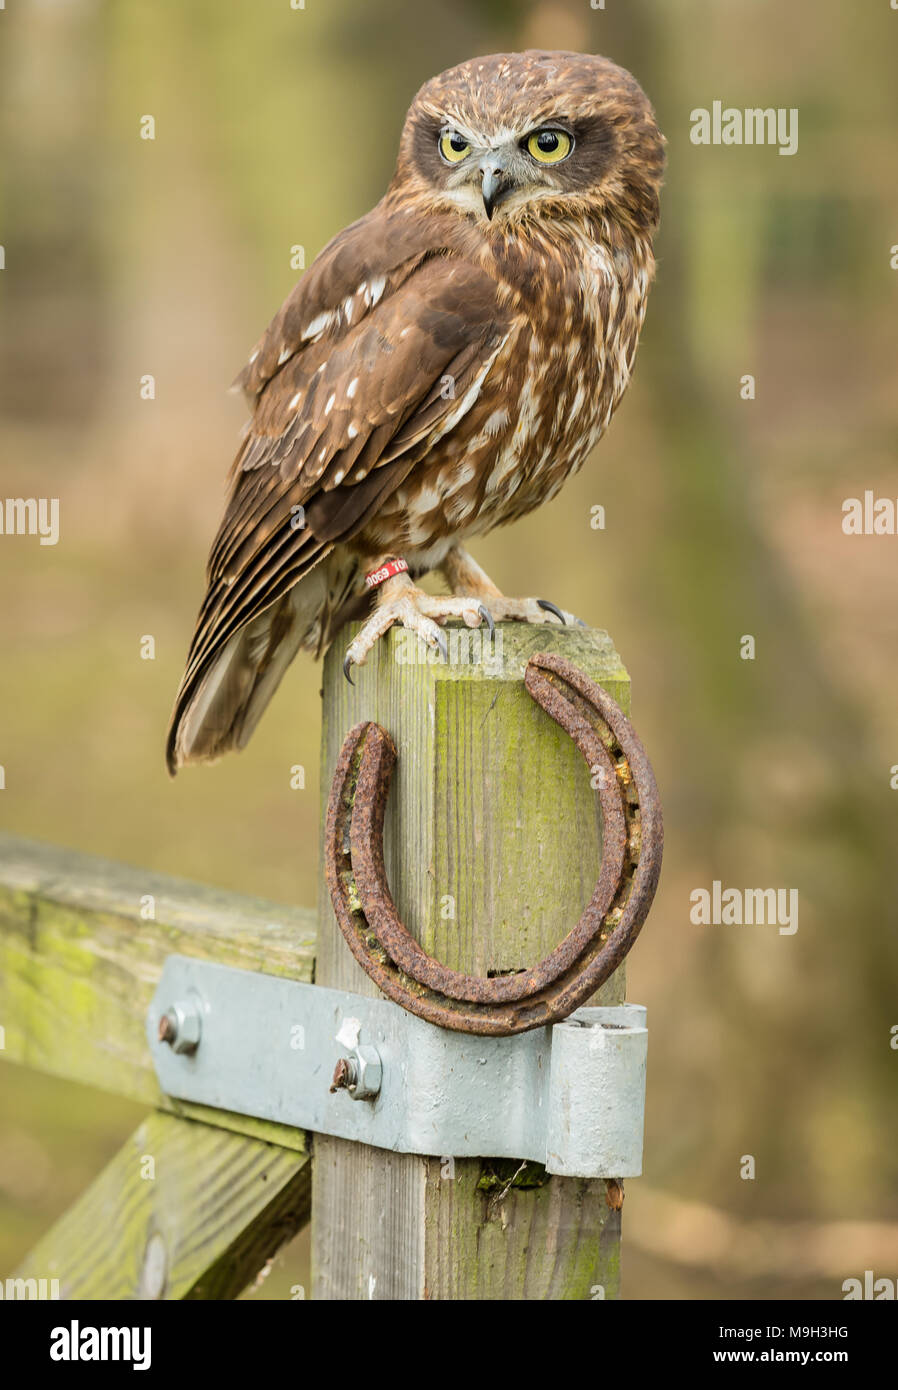 Boobook Owl, a native of Australia, this brown owl is perched on a farm gate post with lucky horse shoe.  Facing forward.  Portrait, Copy space Stock Photo